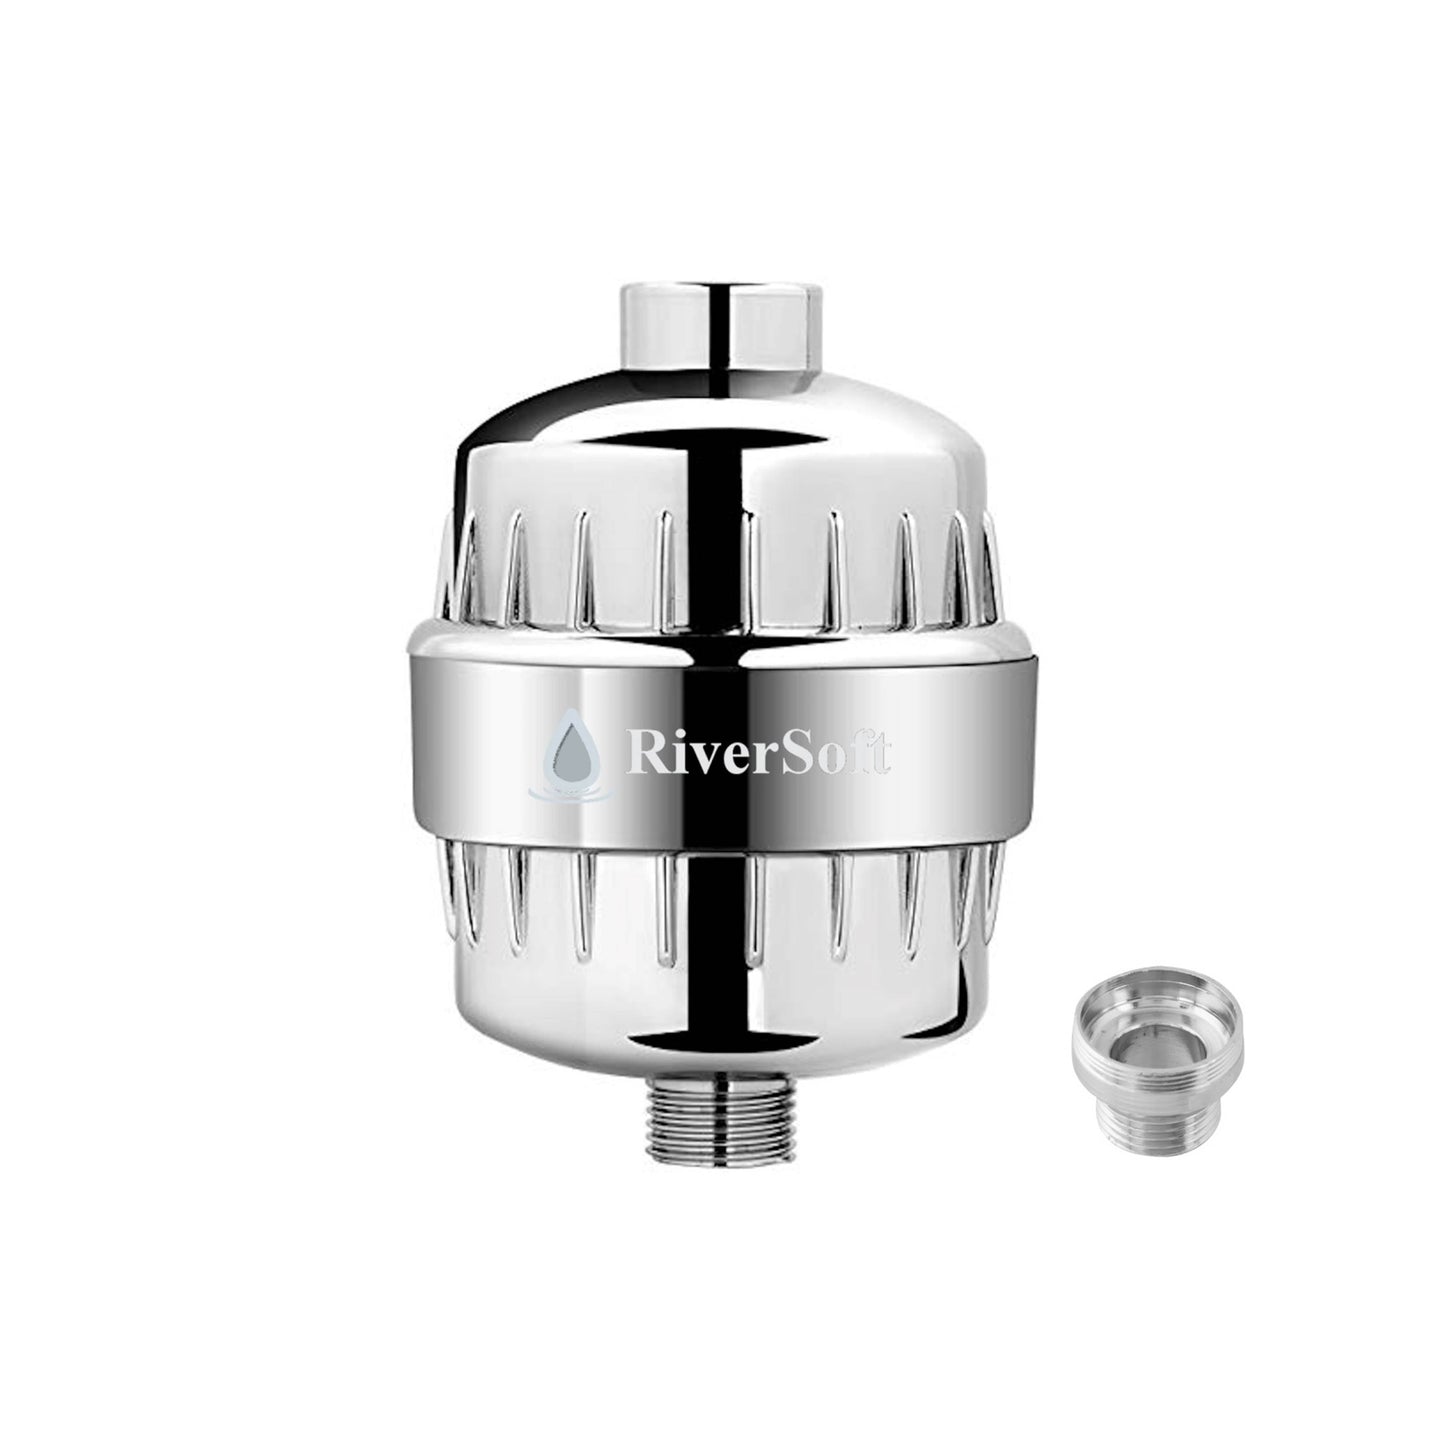 RIVERSOFT SF-15 PRO ABS tap filter for hard water with 15 stage with tap adaptors (Chrome, Filter With 28mm male adaptor).